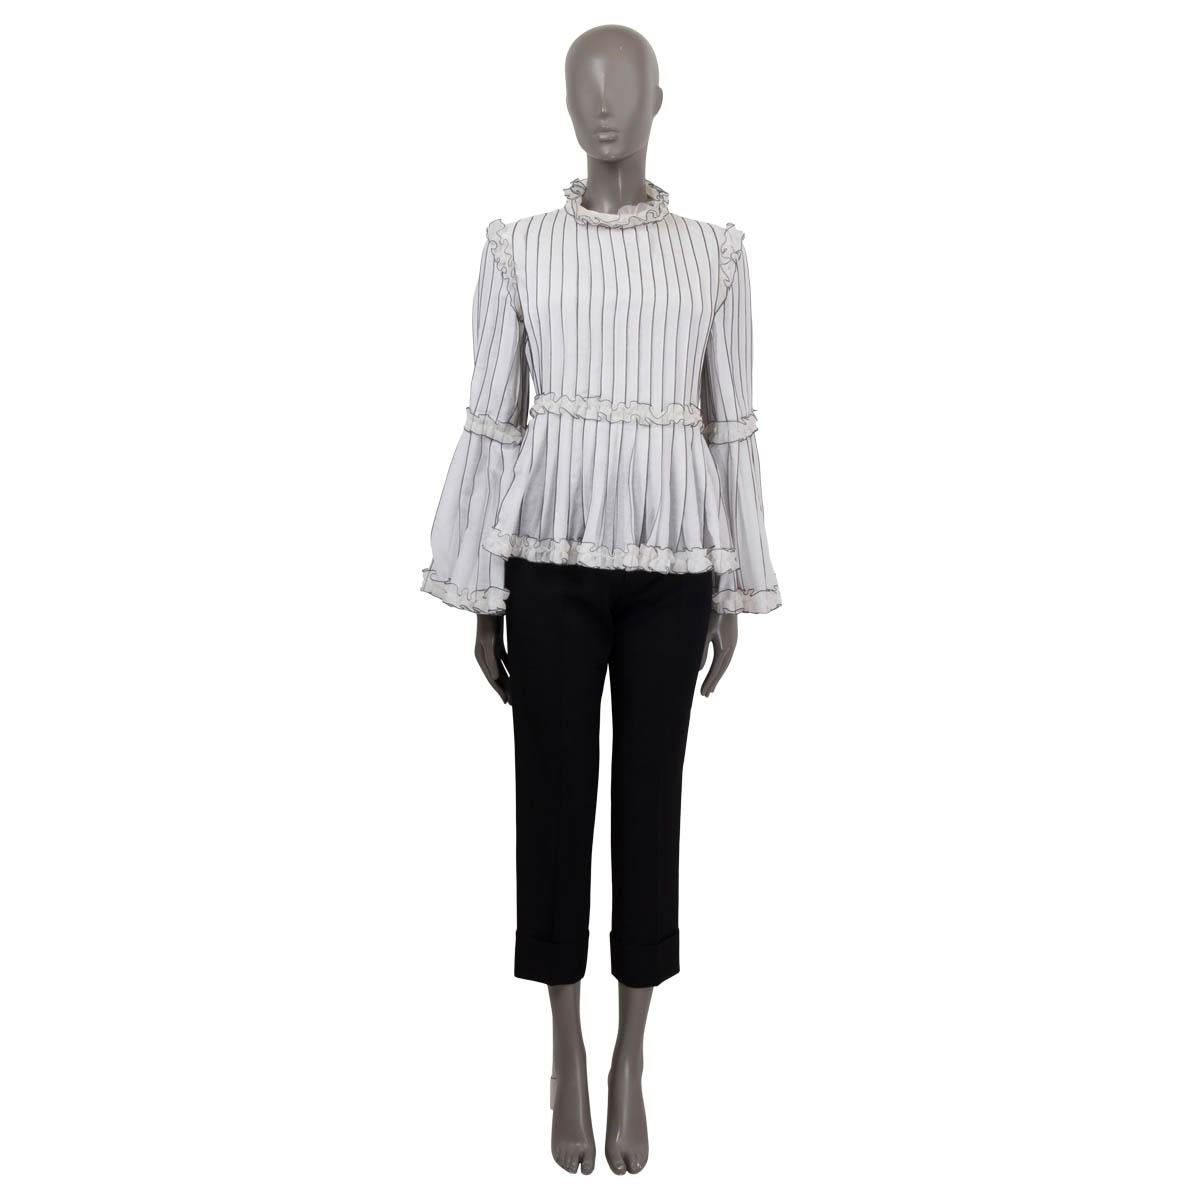 100% authentic Chanel striped blouse in white cotton blend (100%) (missing tag). Features a flared silhoutte and ruffles on the neck and flared sleeves. Closes with a velcro fasteners on the back. Unlined. Has been worn and is in excellent